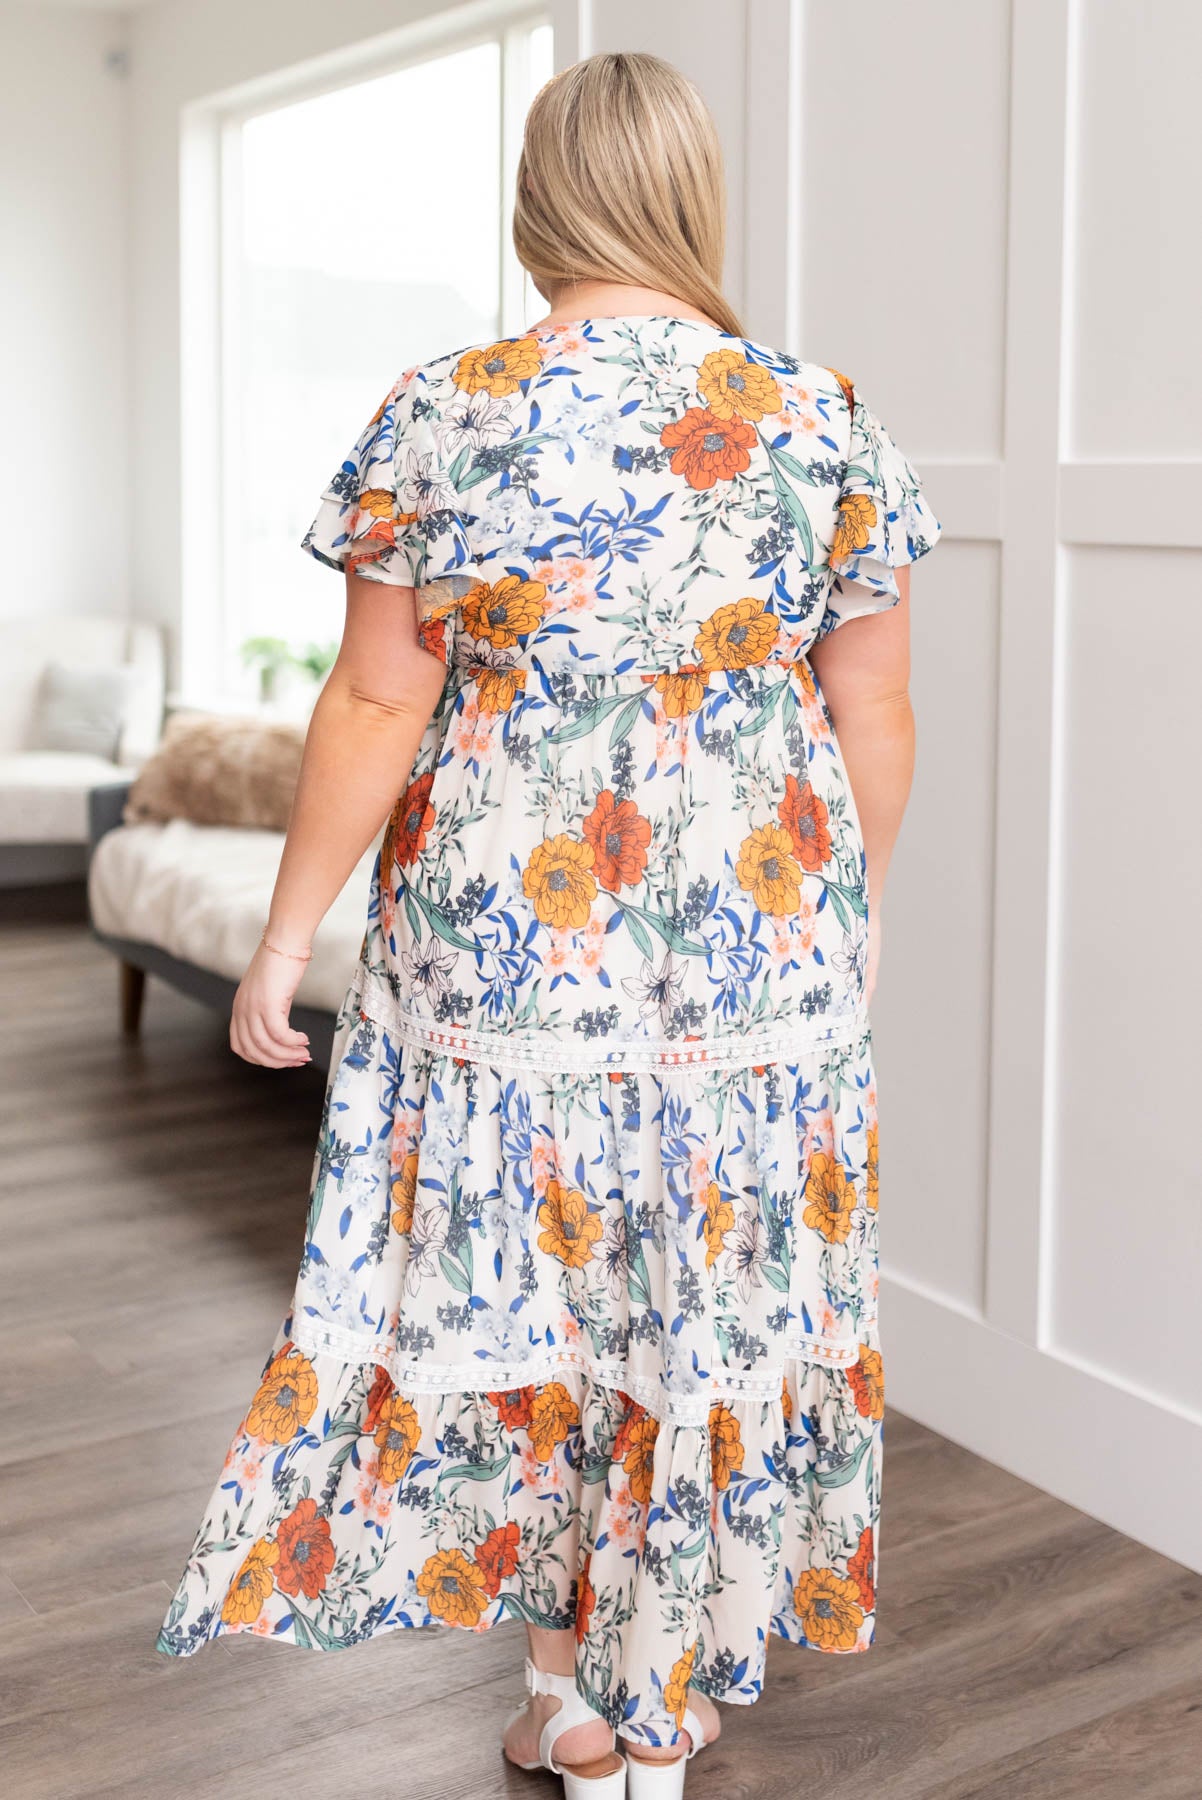 Plus size back view of the cream floral tiered dress